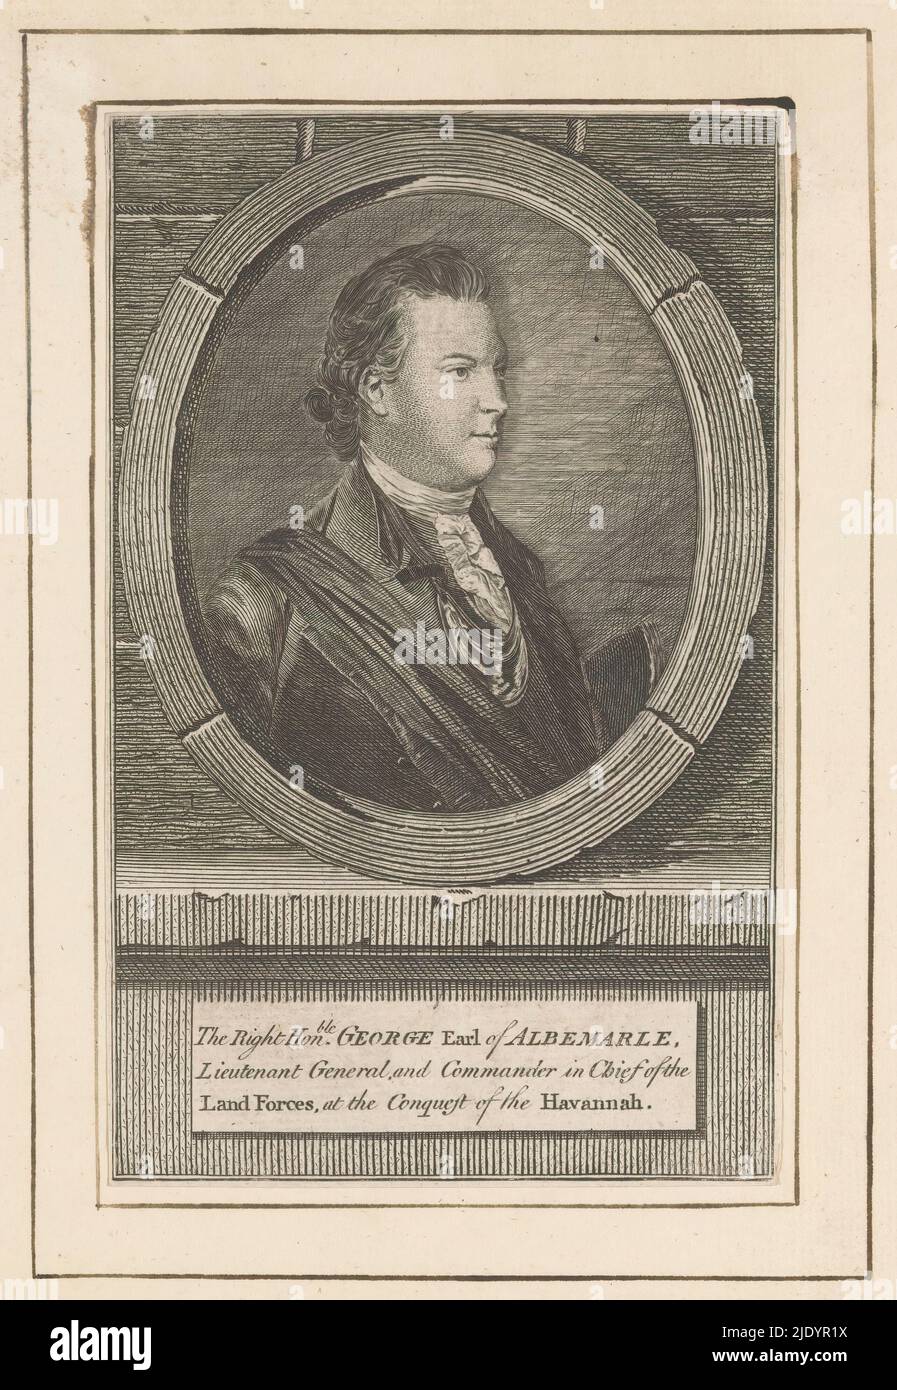 Portrait of George Keppel, Earl of Albemarle, Portrait of George Keppel in an oval frame. In a frame his name and titles., print maker: anonymous, 1762 - 1849, paper, engraving, height 172 mm × width 107 mm Stock Photo